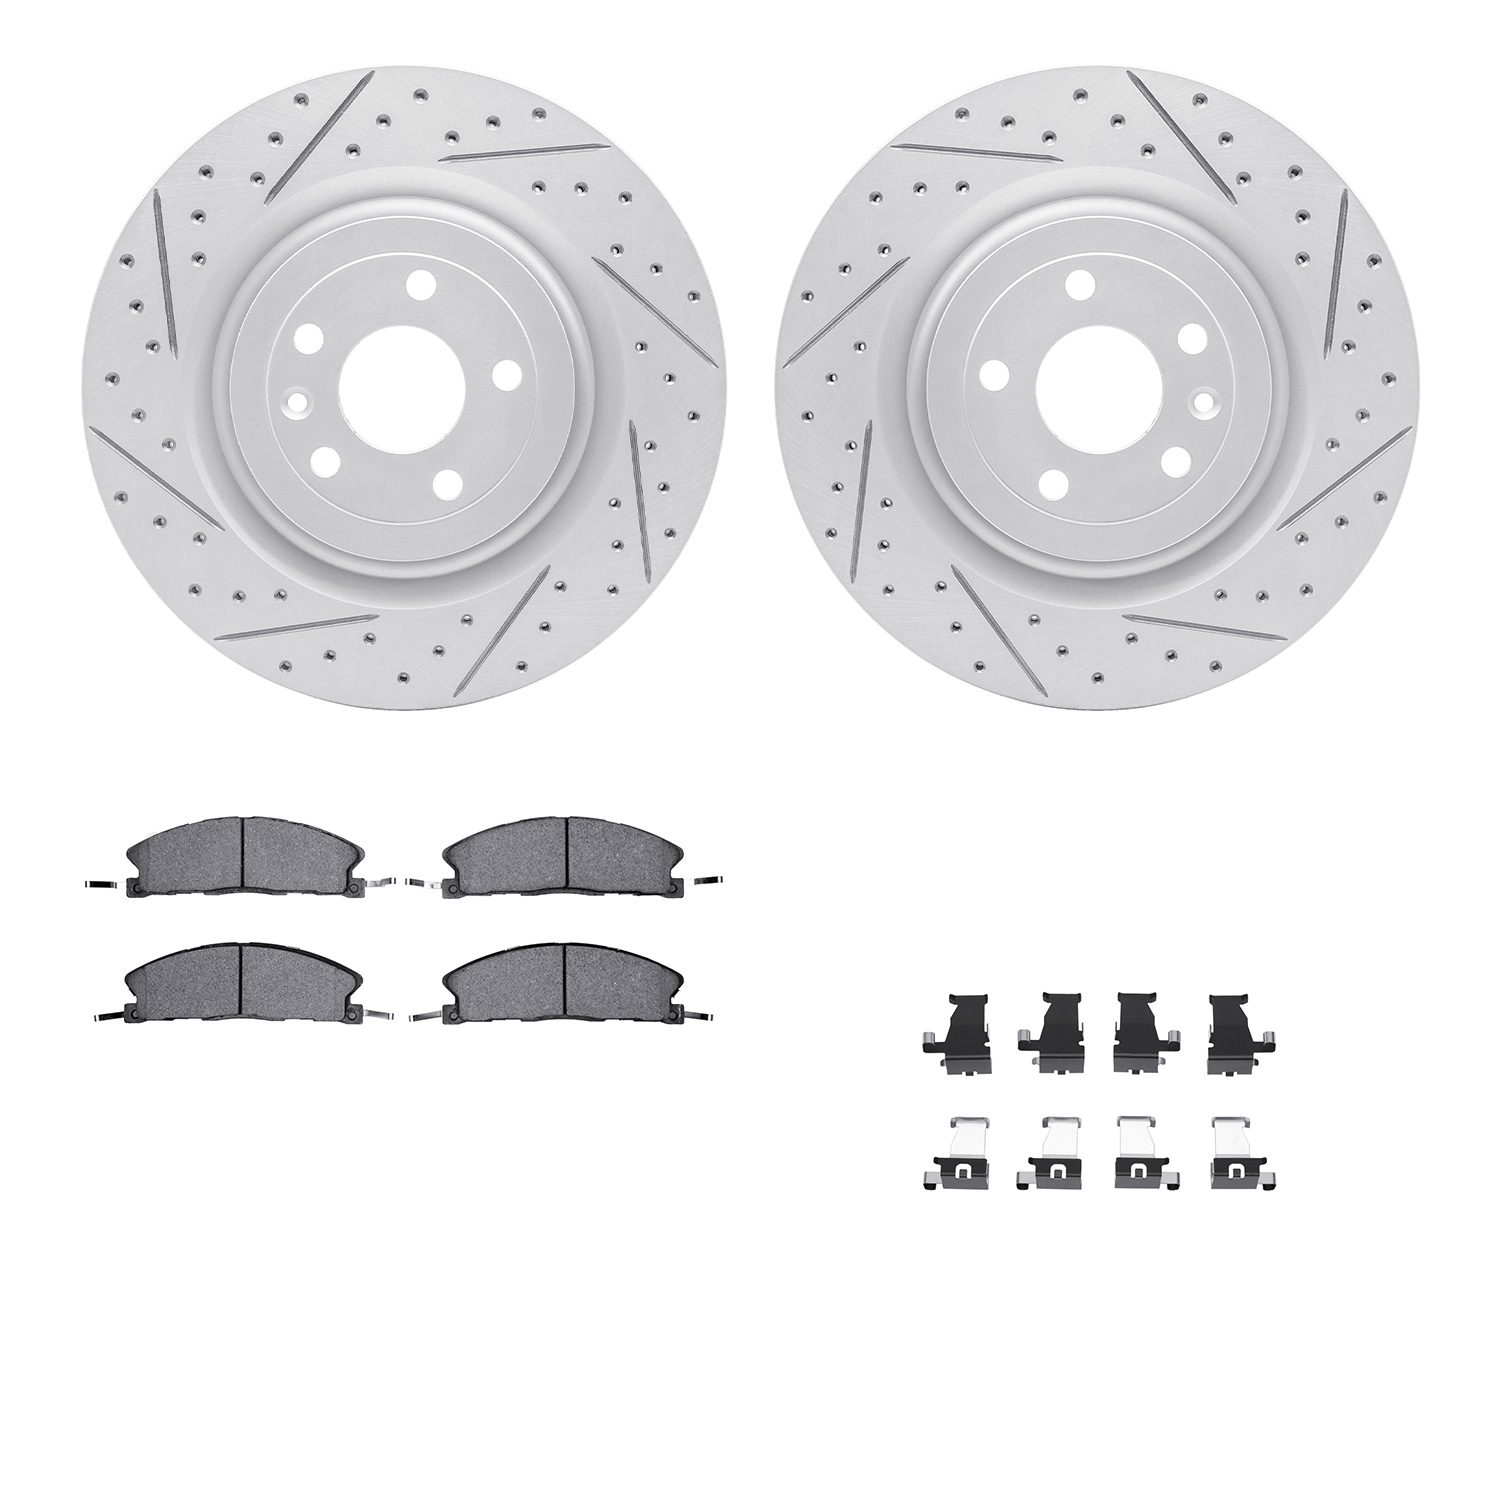 2212-99211 Geoperformance Drilled/Slotted Rotors w/Heavy-Duty Pads Kit & Hardware, 2013-2019 Ford/Lincoln/Mercury/Mazda, Positio